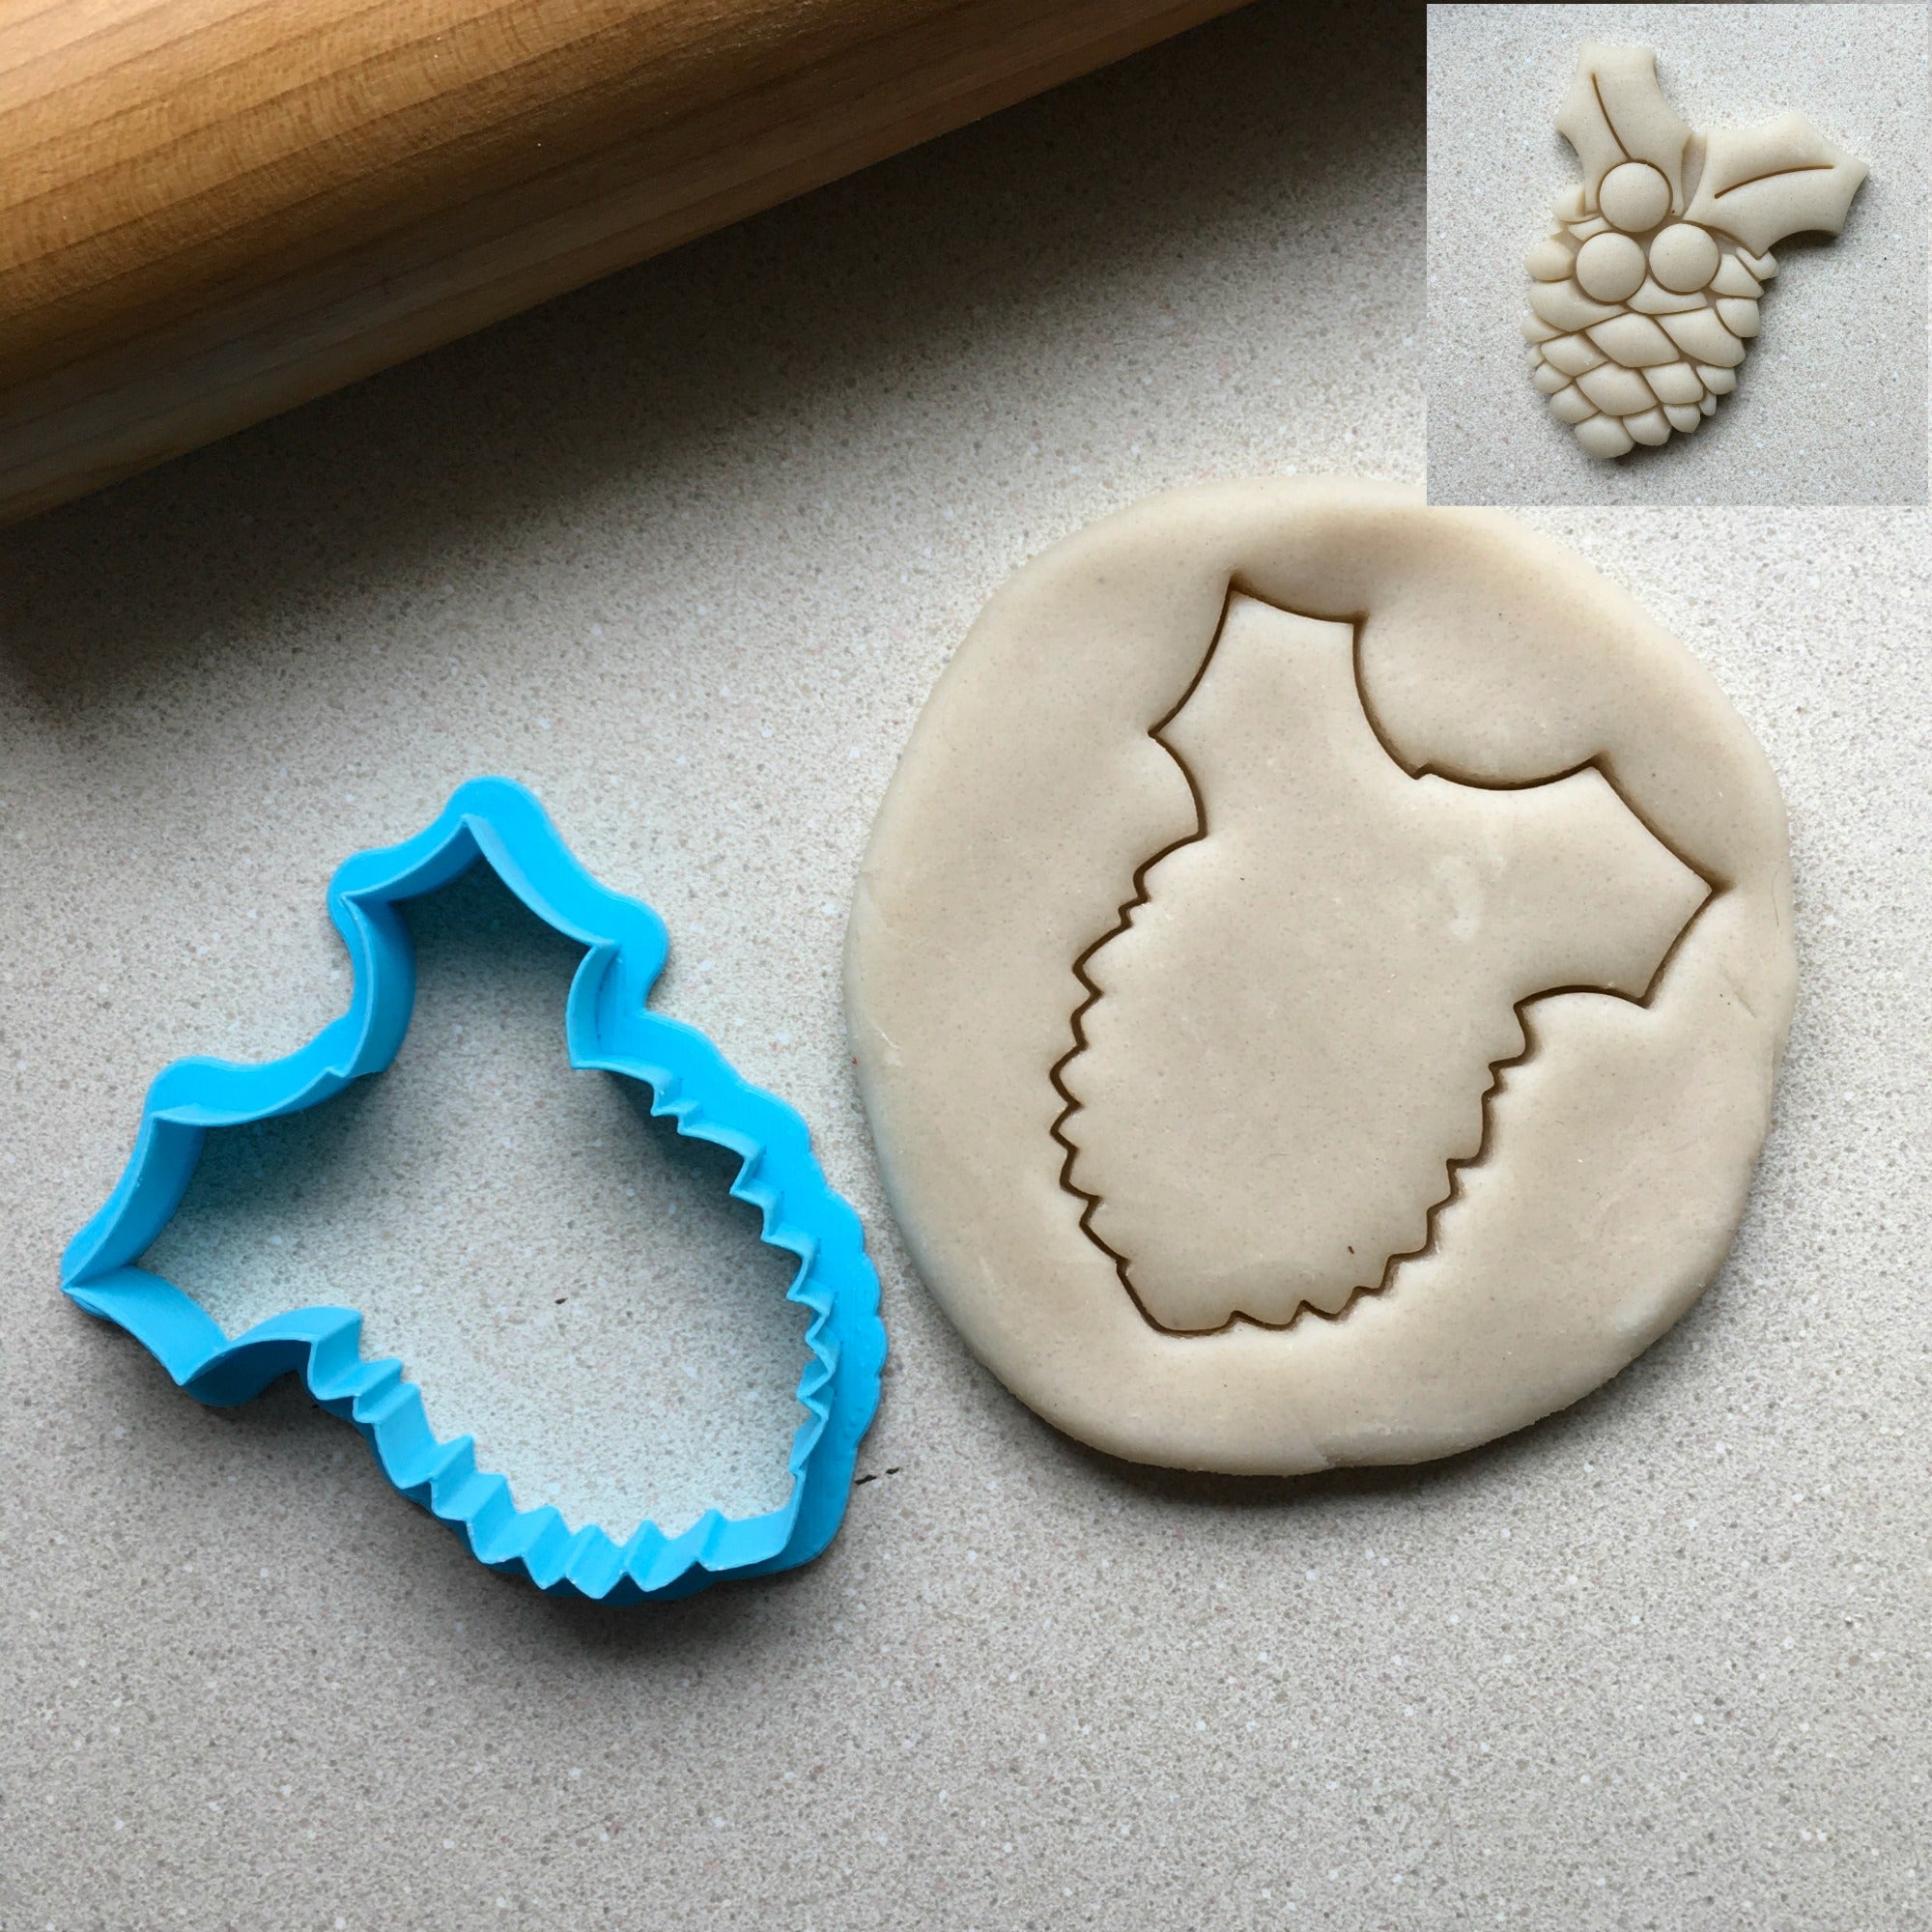 Pine Cone with Holly Cookie Cutter/Dishwasher Safe